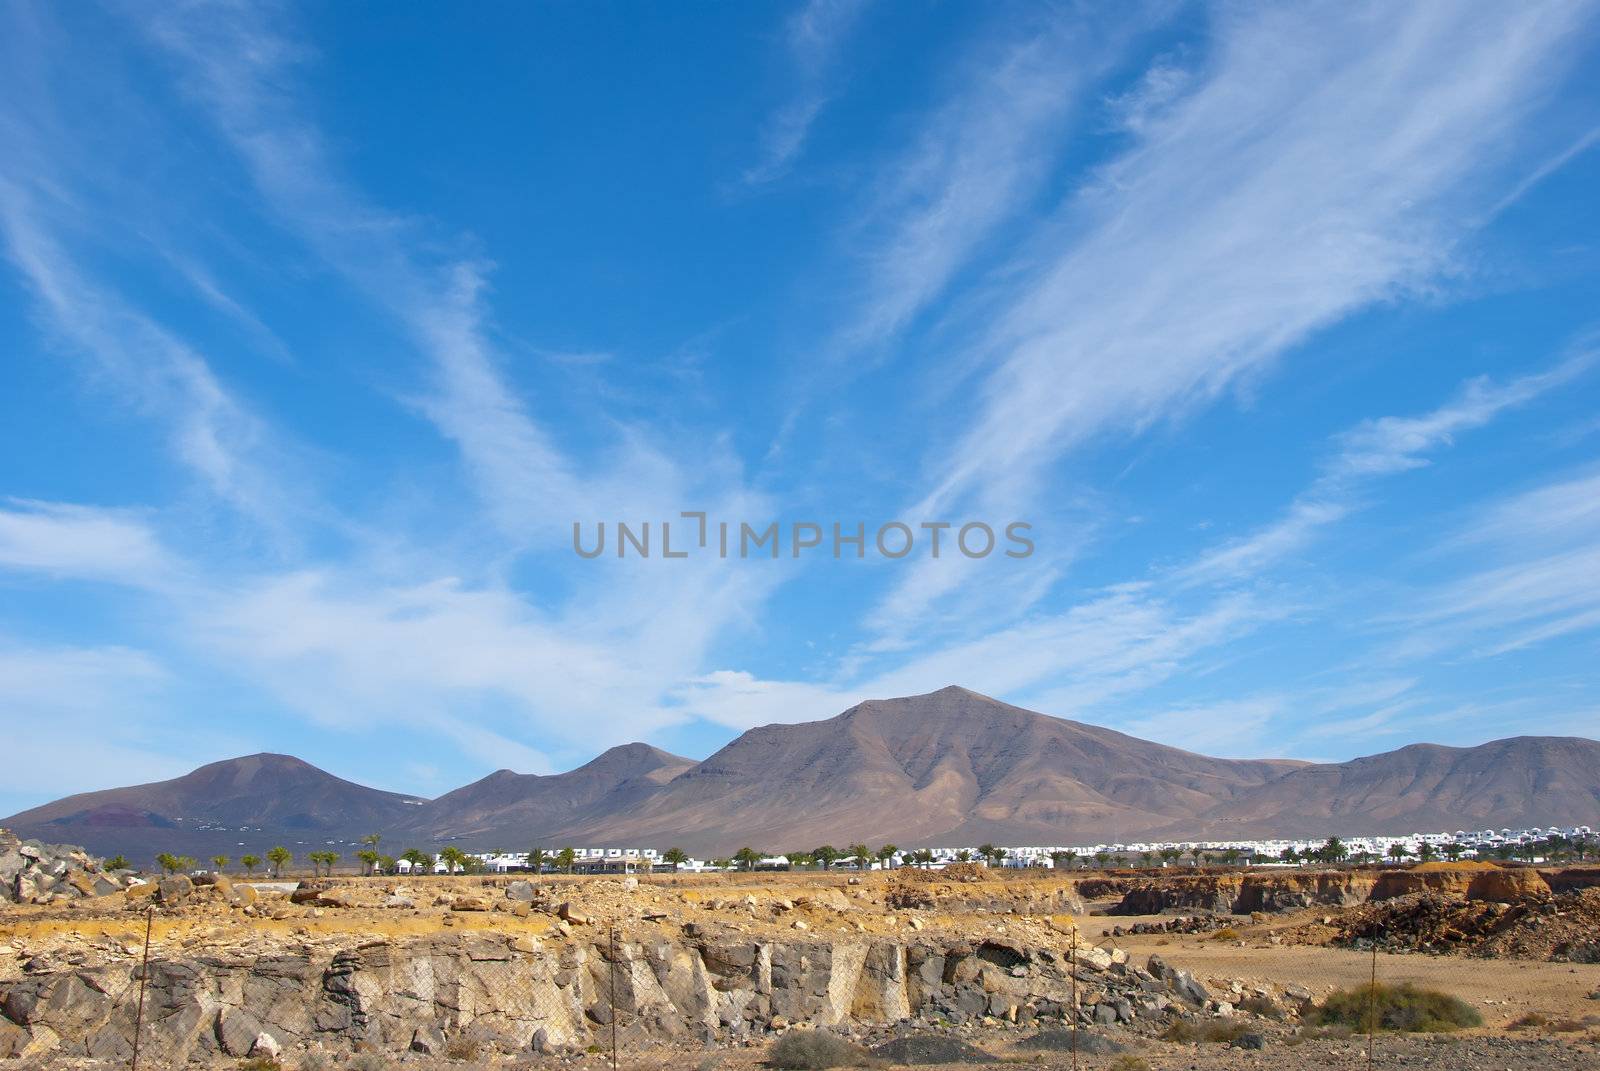 Barren Landscape and Extinct Volcanoes in the Canary Islands